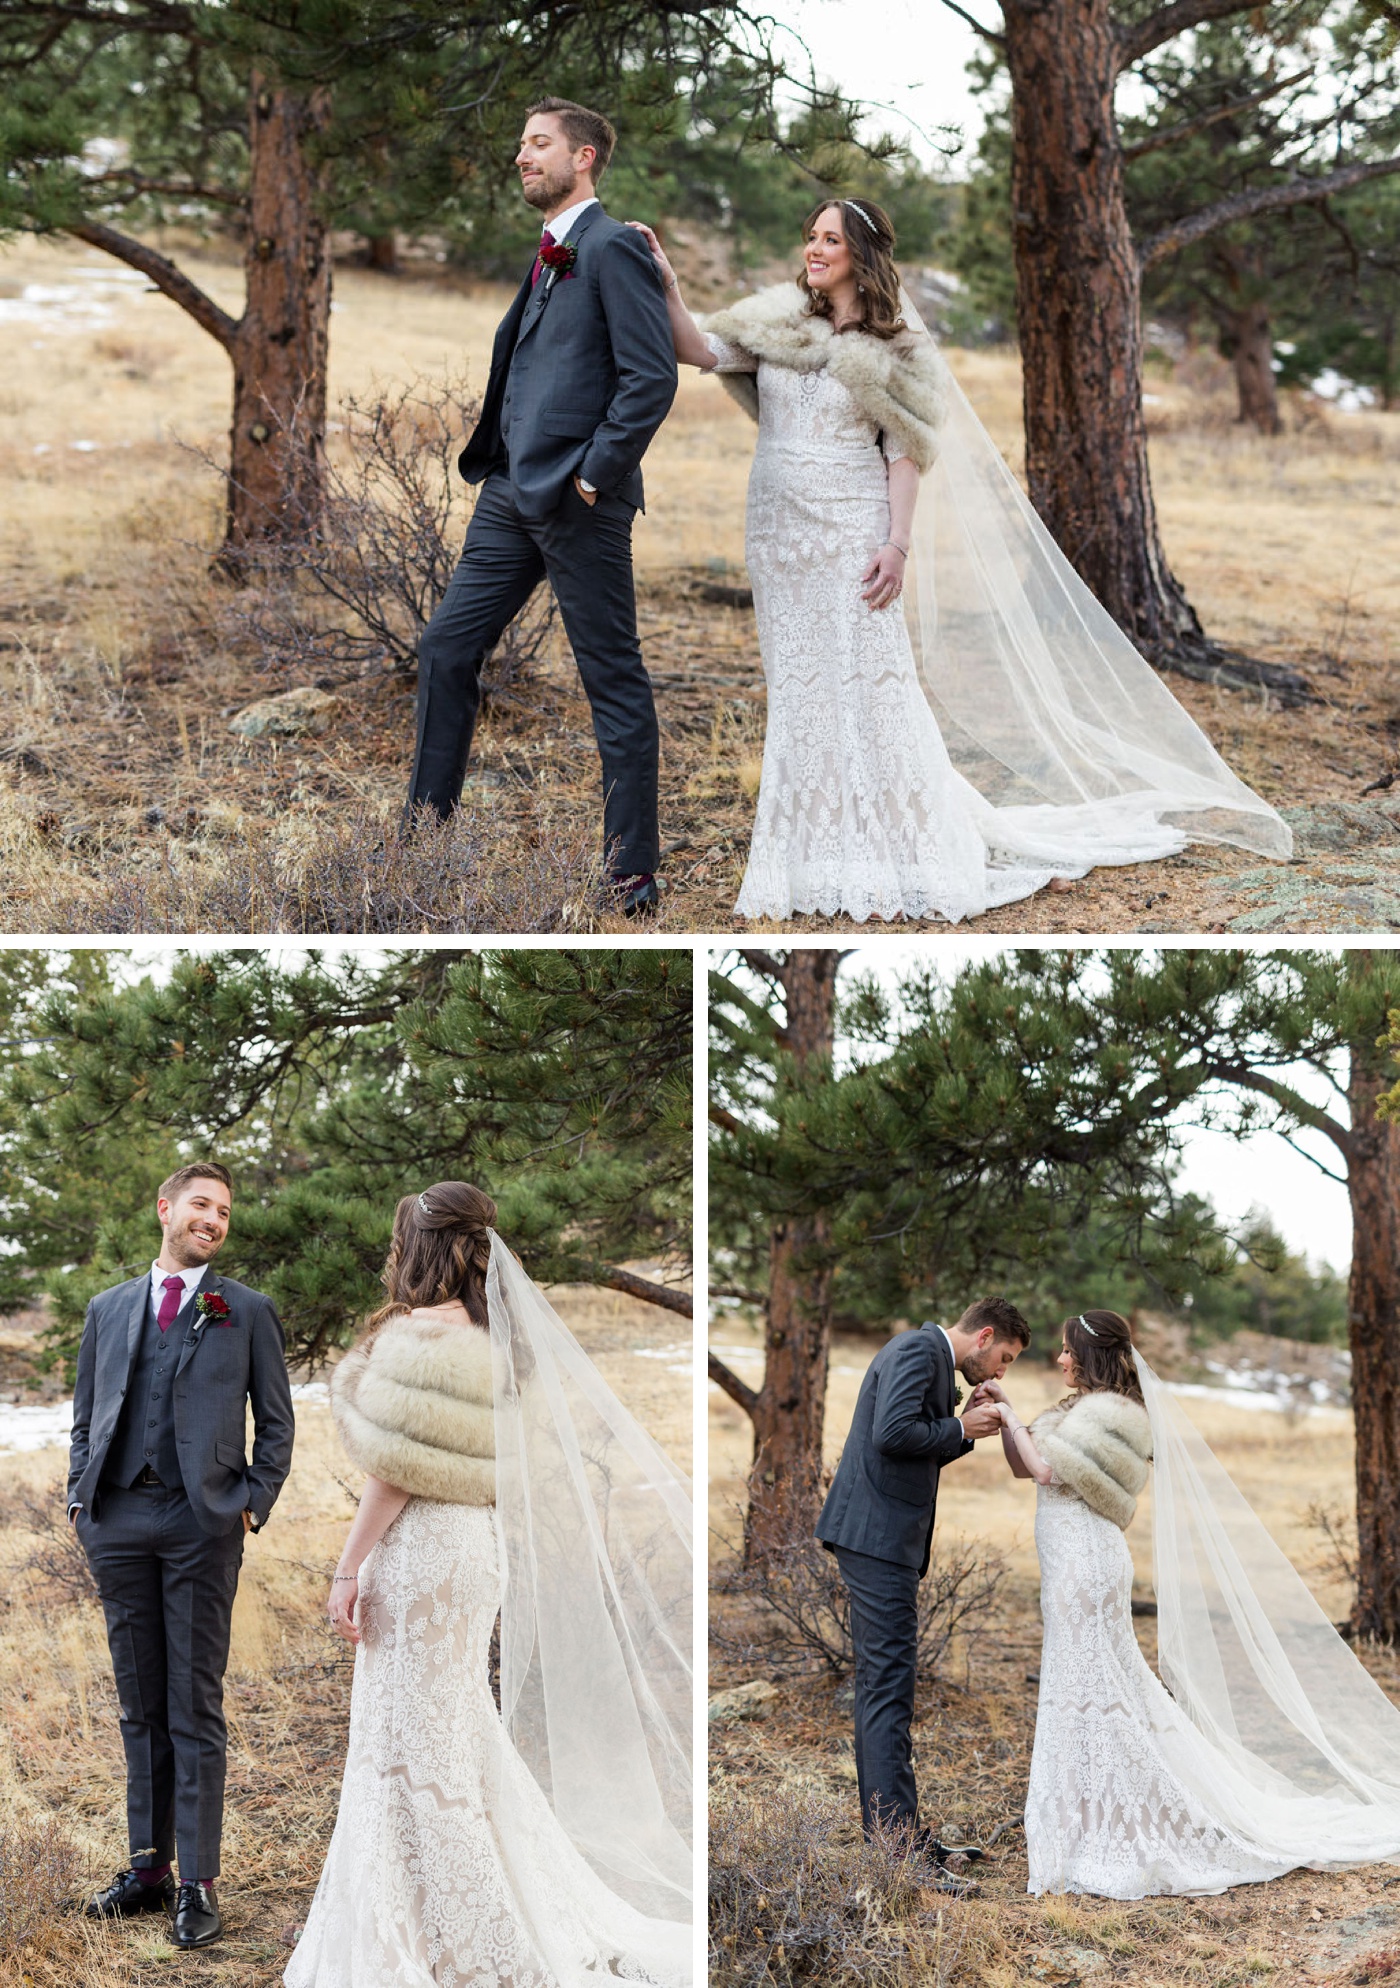 How to plan for a fall wedding in Estes Park